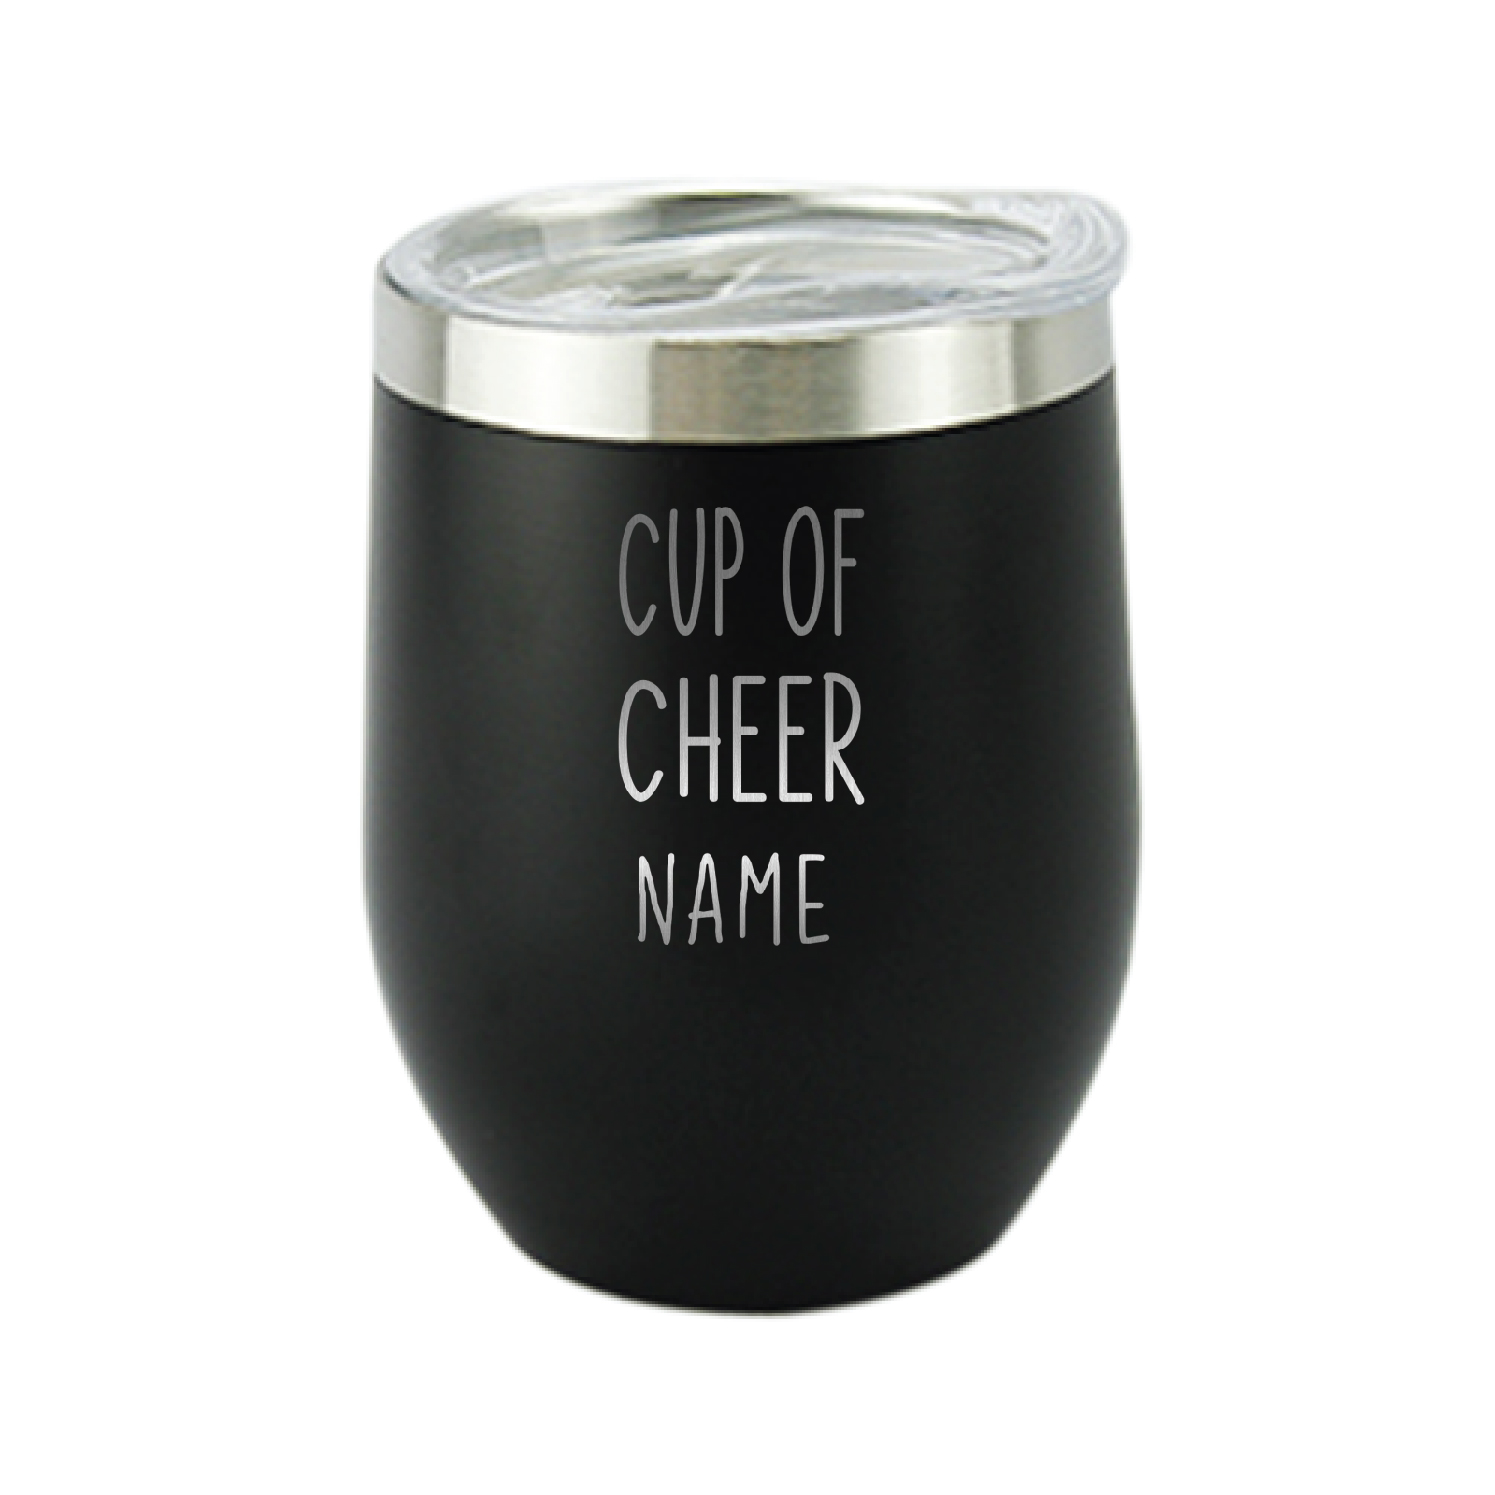 Cup of Cheers Black Wine Personalised Vacuum Insulated Stainless Steel Tumbler with Lid